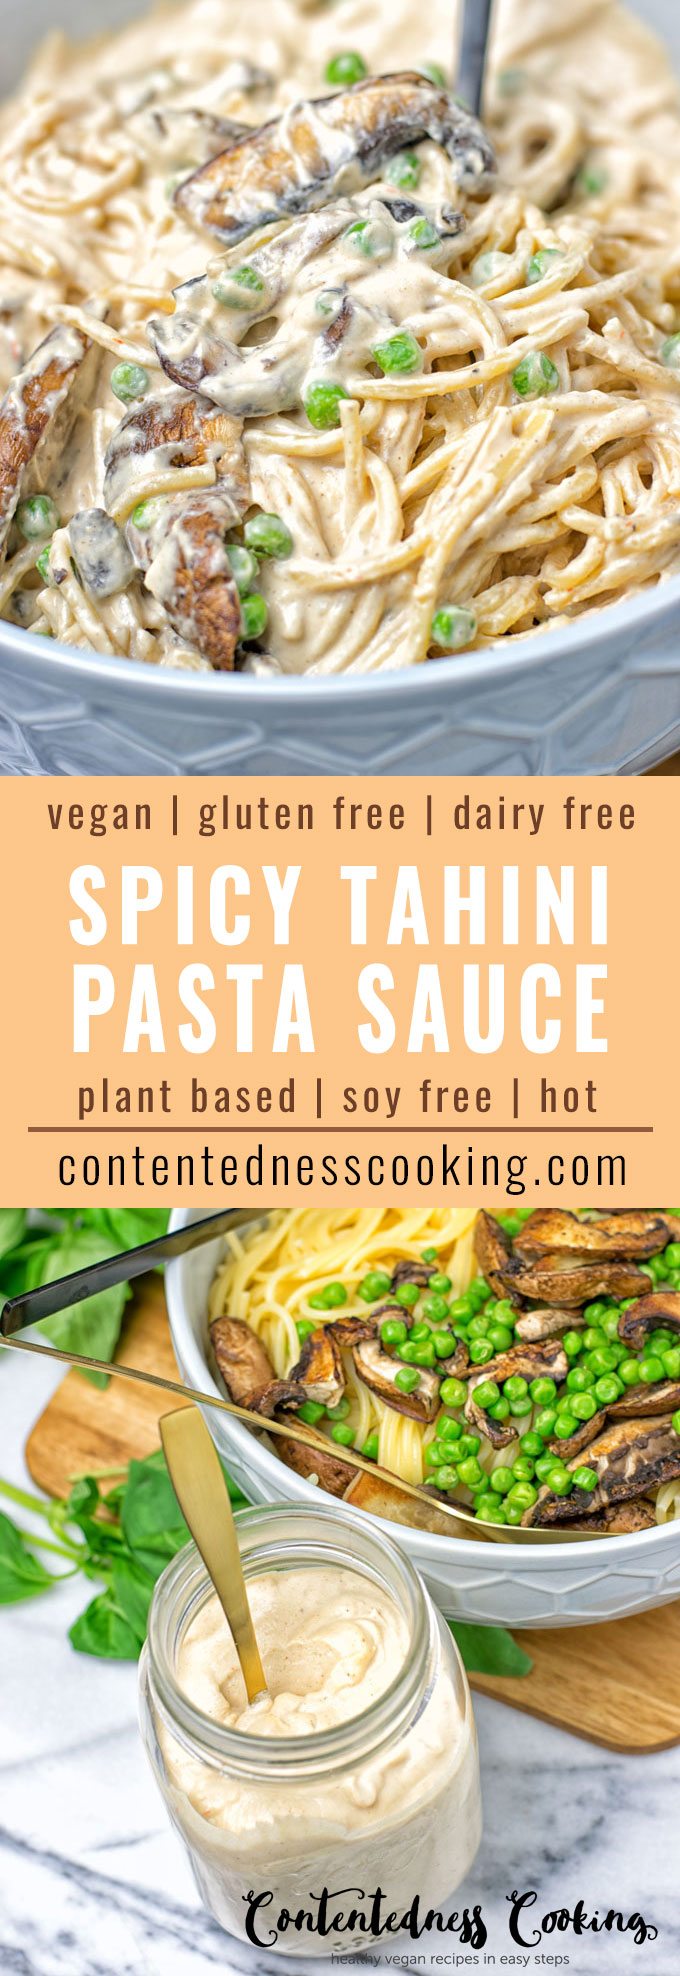 Collage of two pictures of the Spicy Tahini Pasta Sauce with recipe title text.